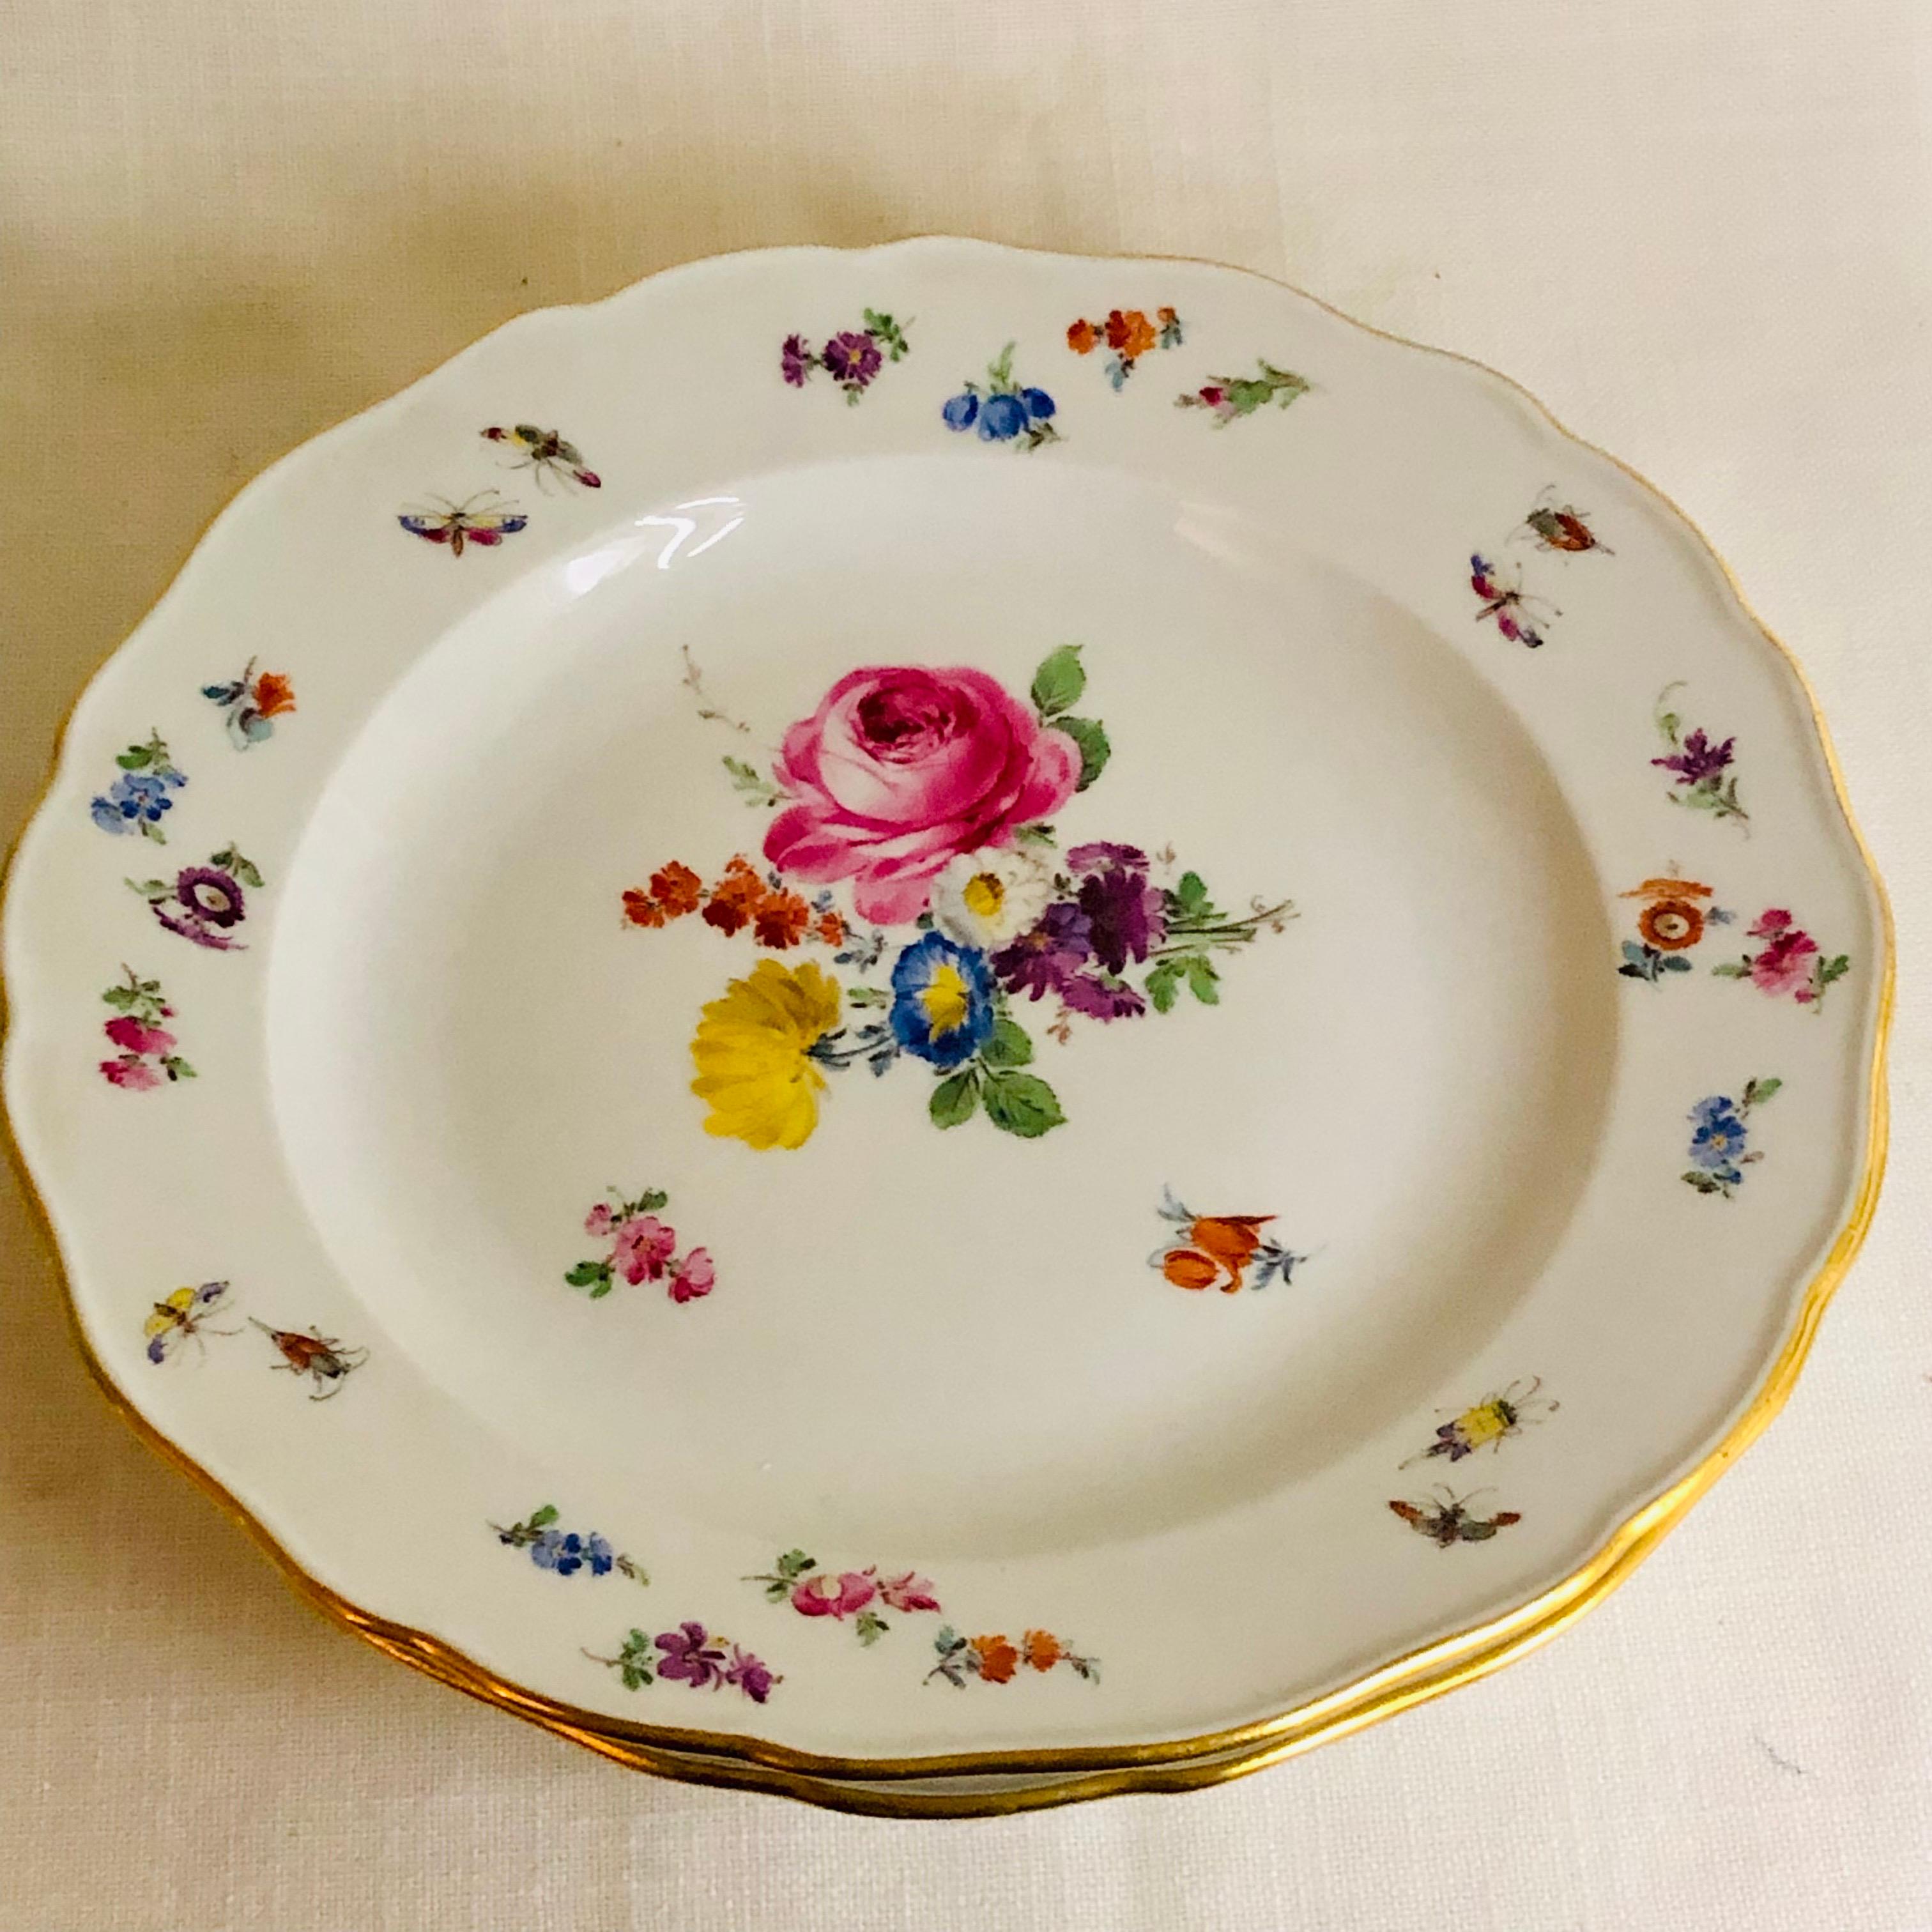 German Set of 12 Meissen Dinner Plates Each Painted with a Different Bouquet of Flowers